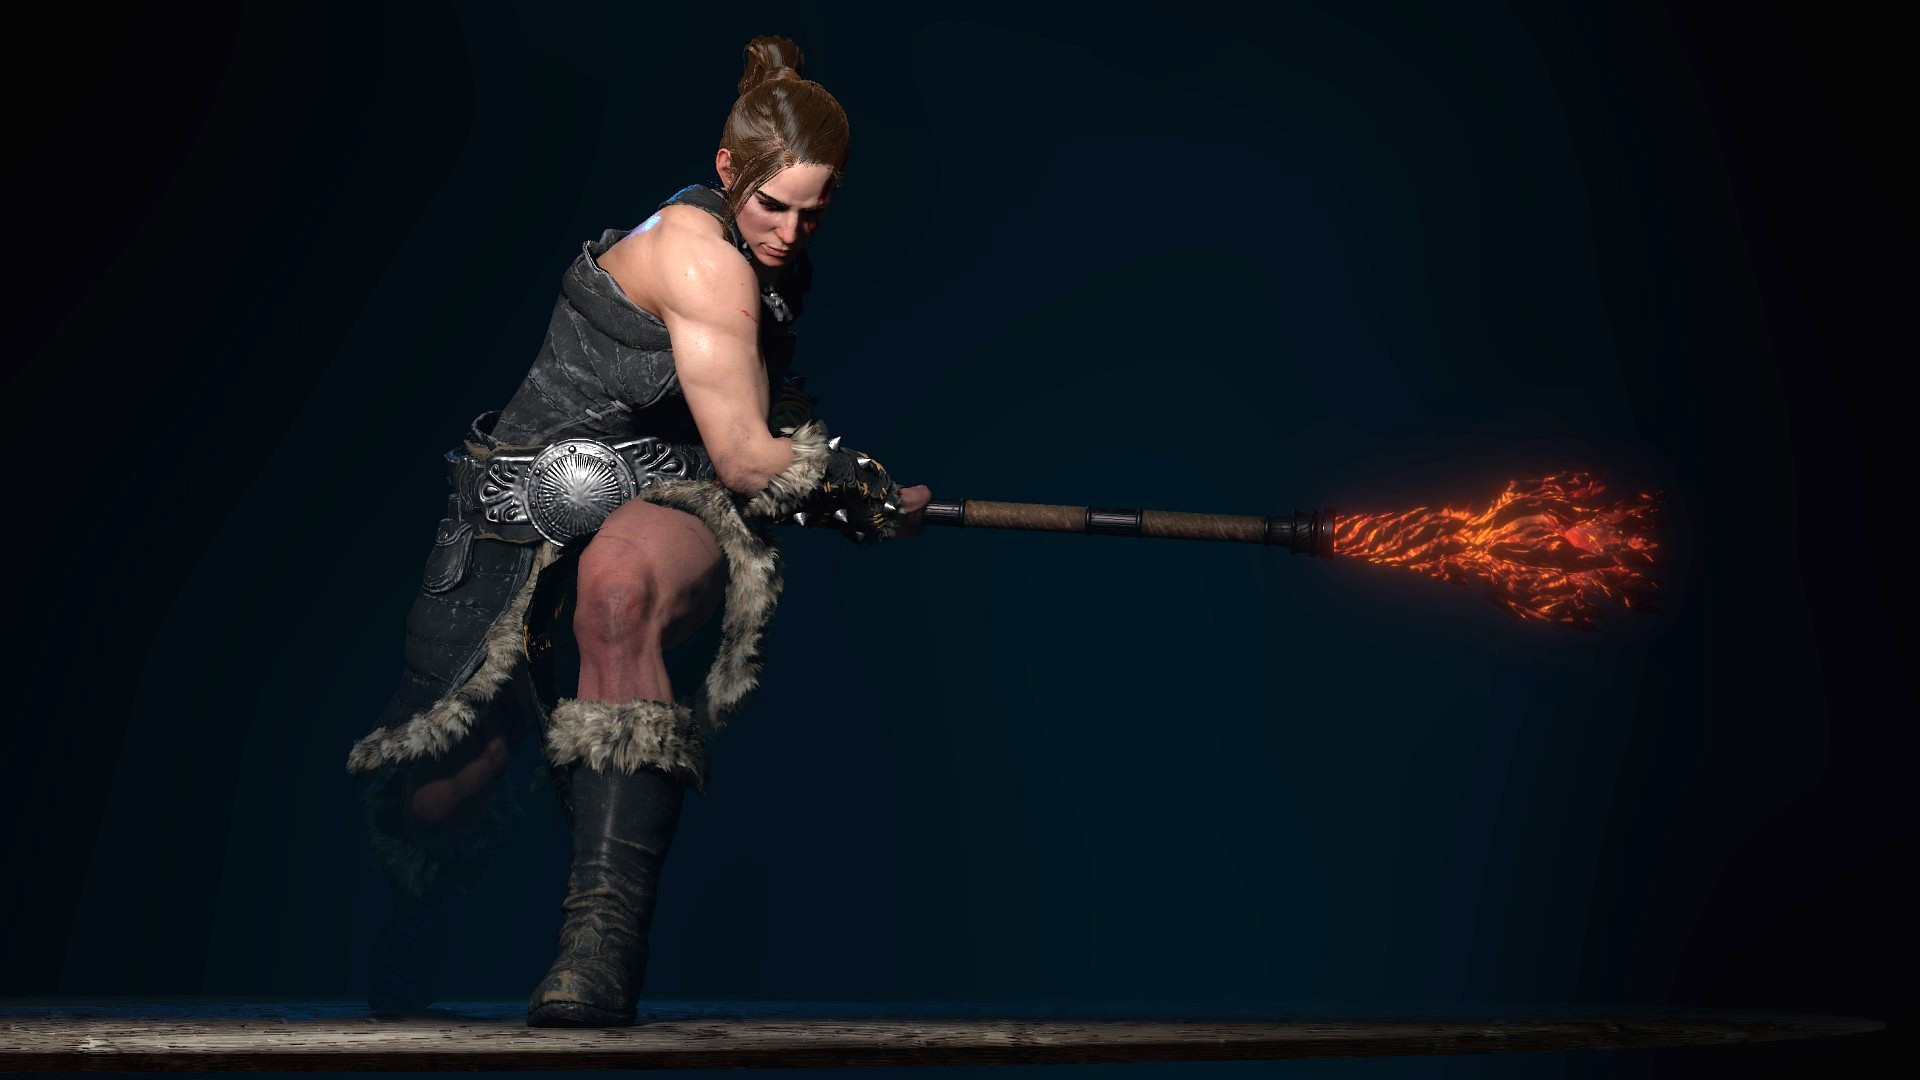 Diablo 4’s character creator makes it “the most inclusive” title in the series